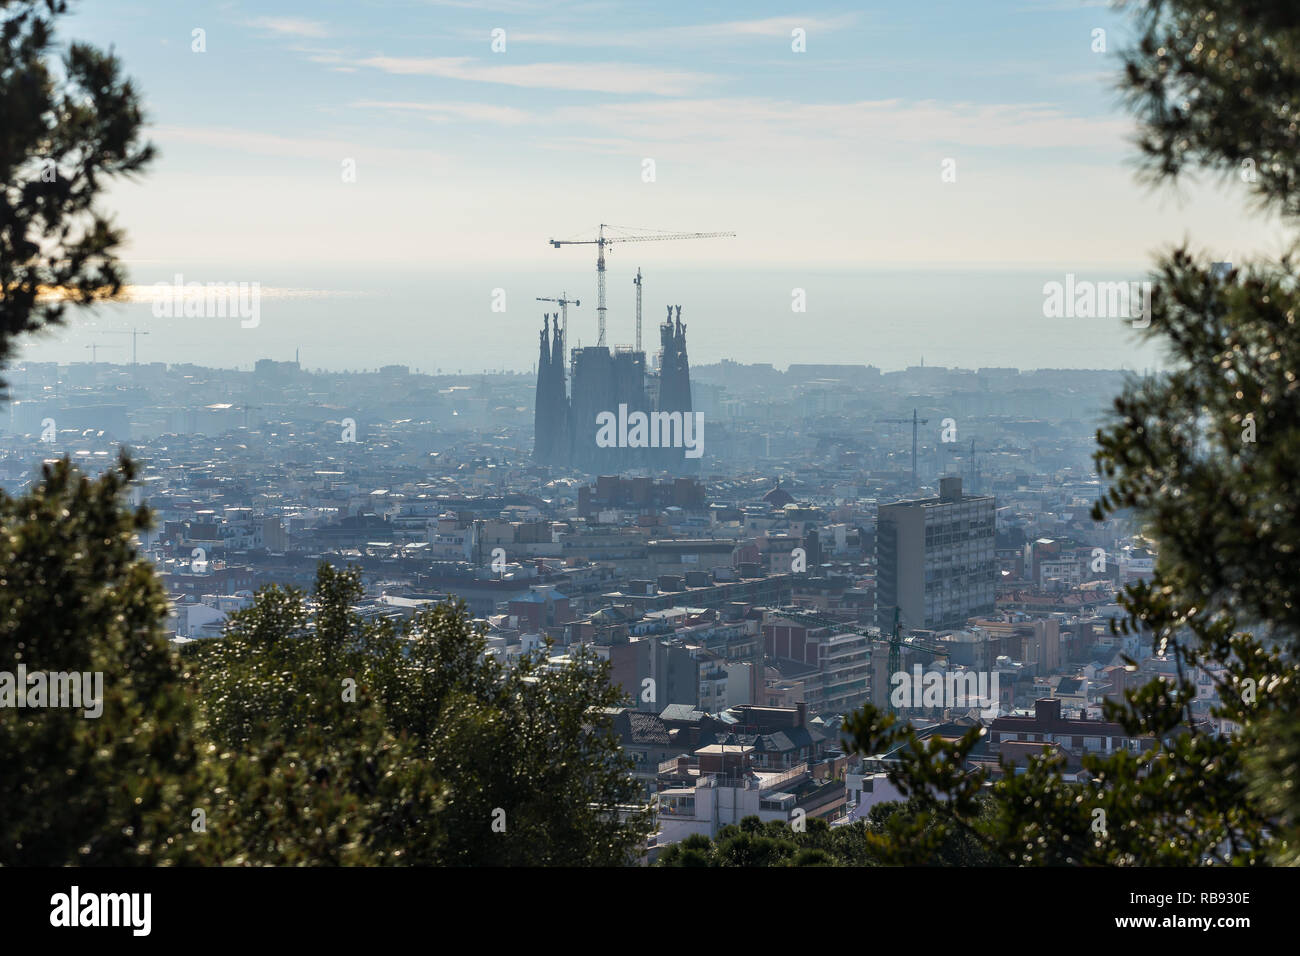 Barcelona, Spain - March 28, 2018: Barcelona city skyline at day time with a Sagrada Familia silhouette, Spain Stock Photo